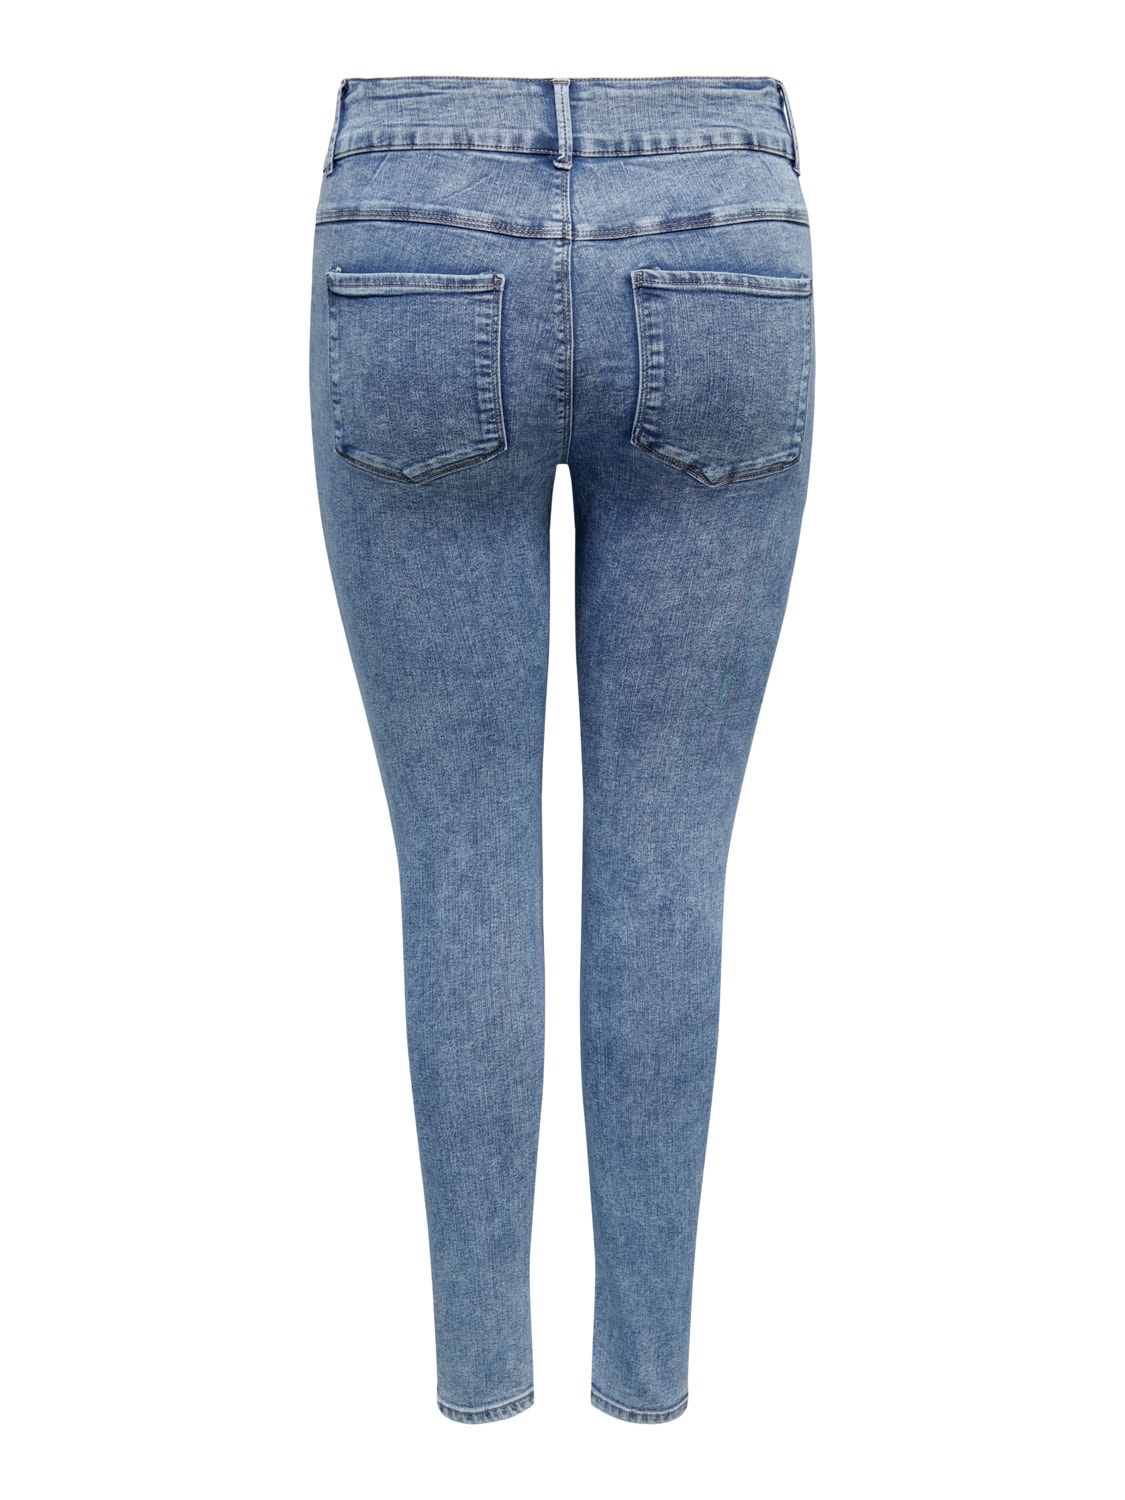 ONLY Jeans Skinny Fit Taille moyenne Curve -Medium Blue Denim - 15257882